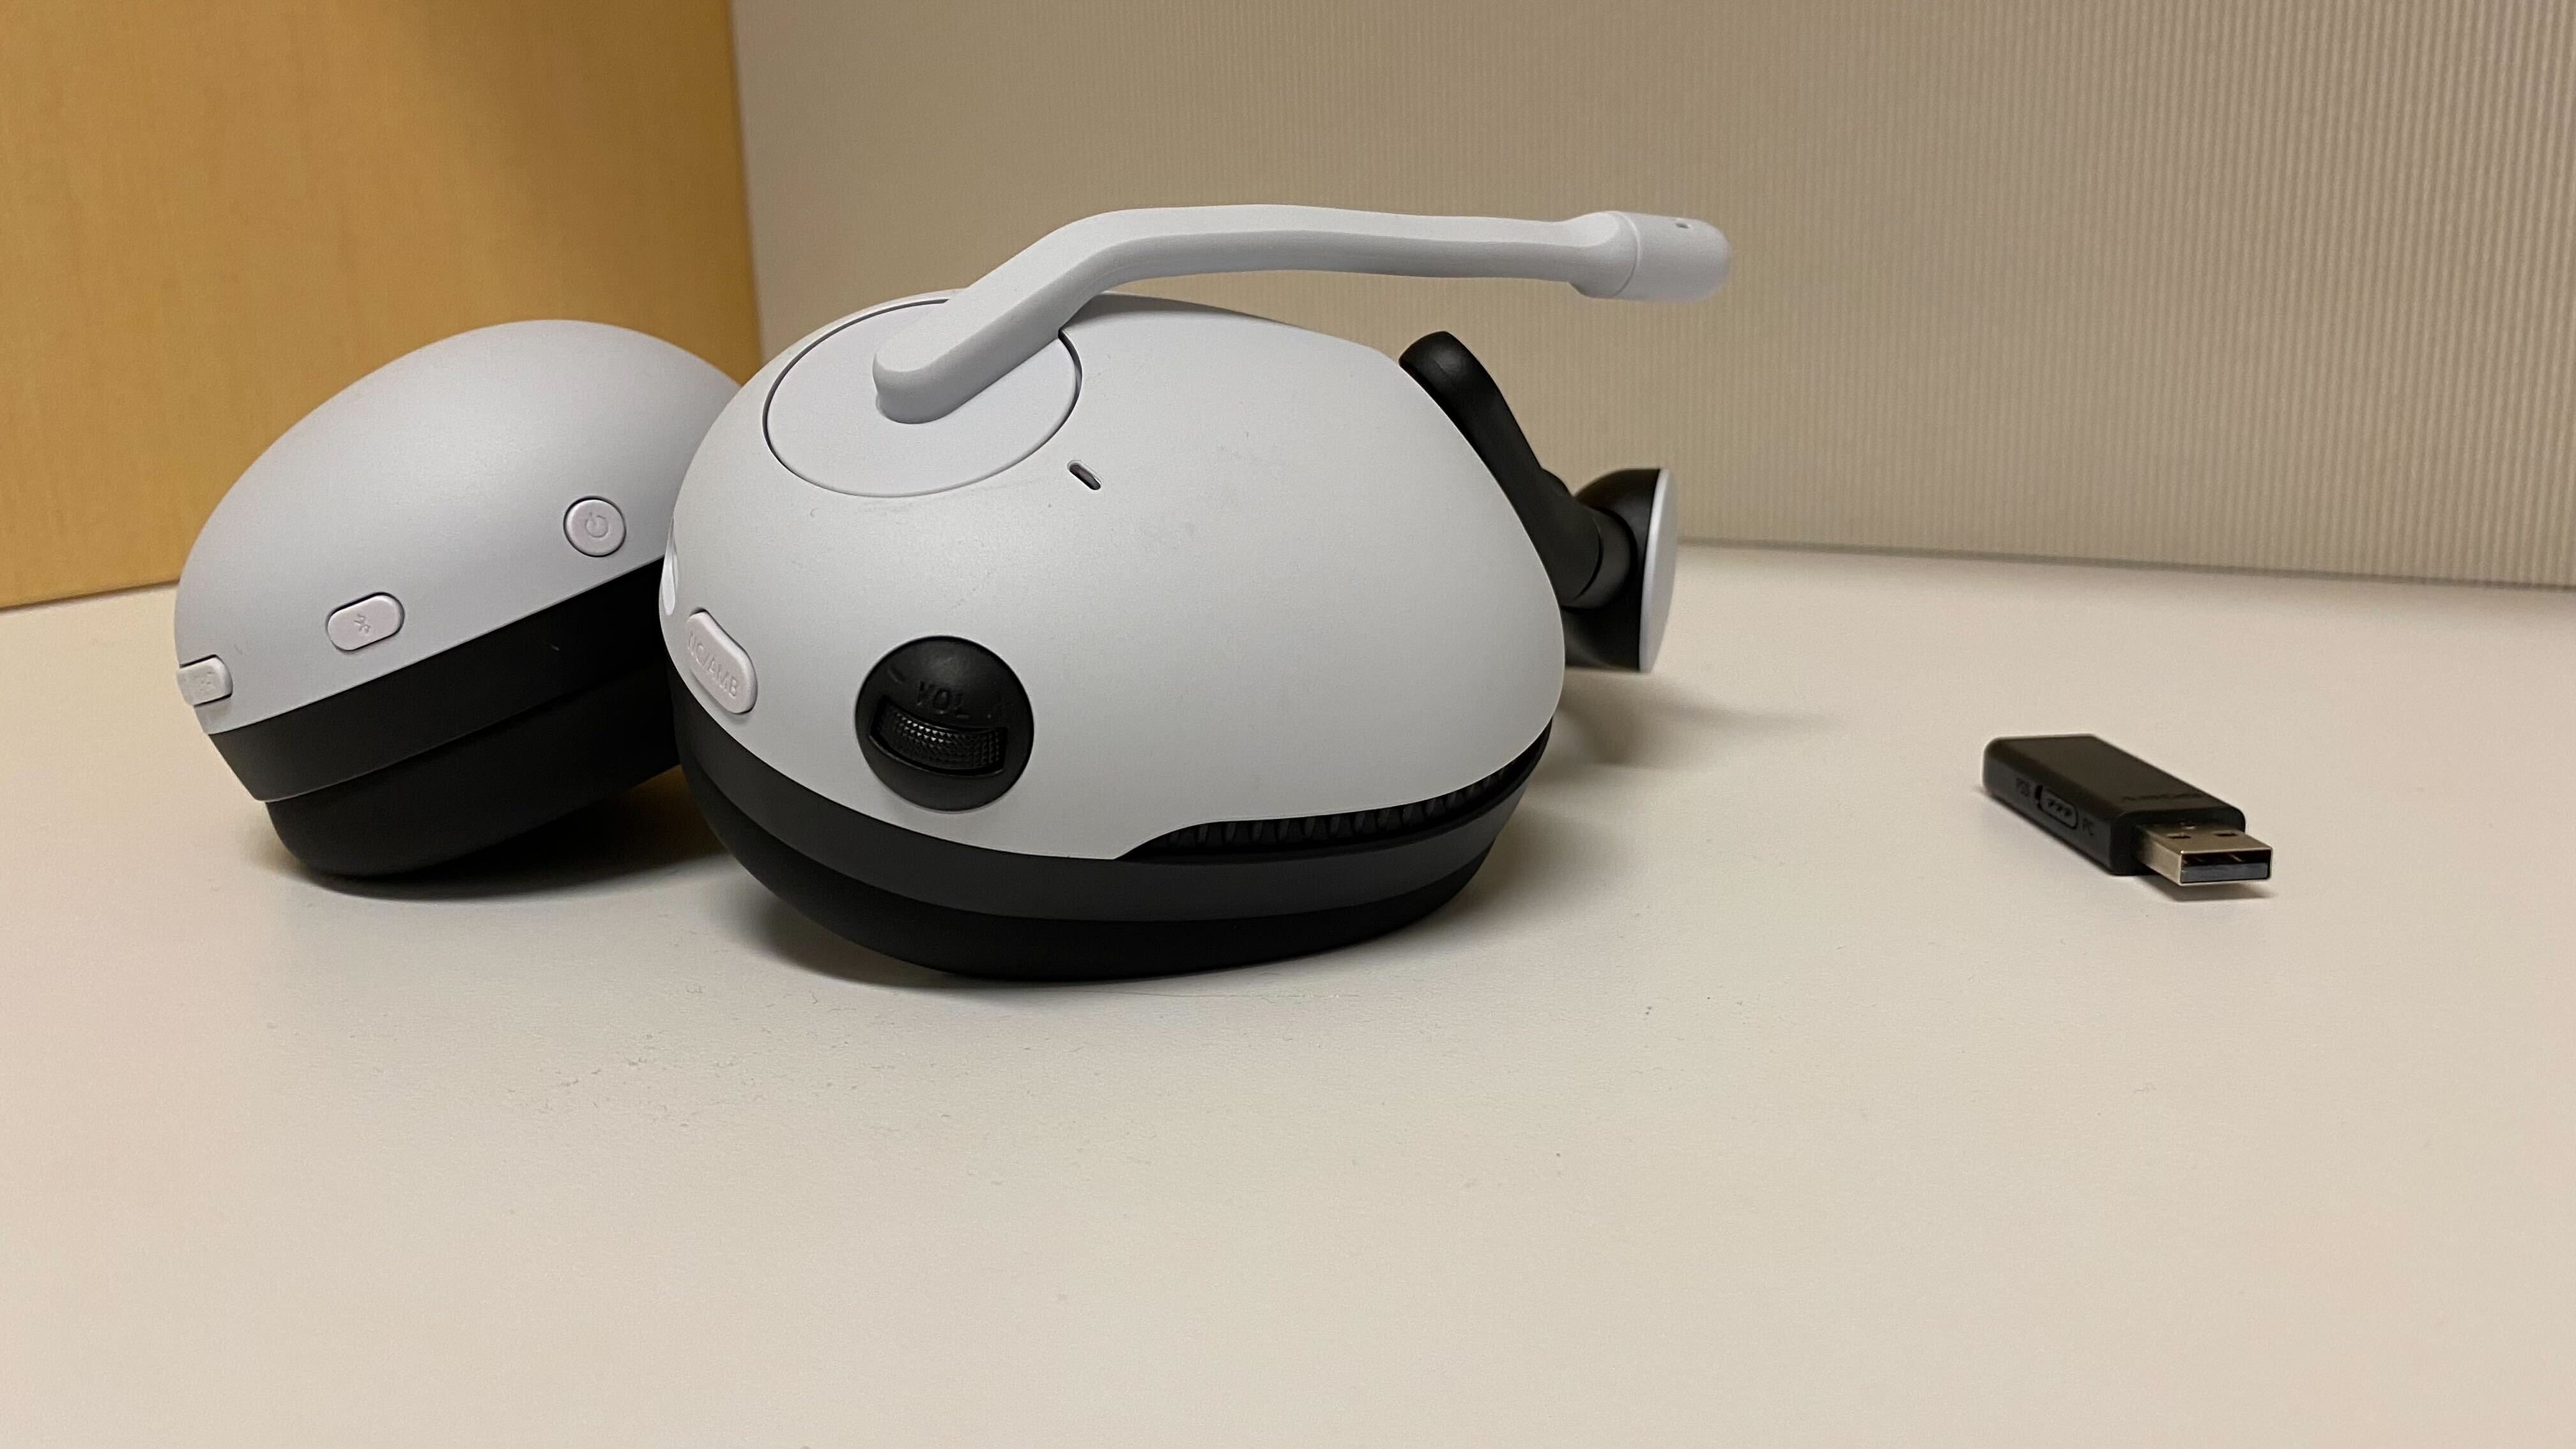 The headset can get a little scuffed, but it's easy to wipe off. (Photo: Michelle Ehrhardt/Gizmodo)